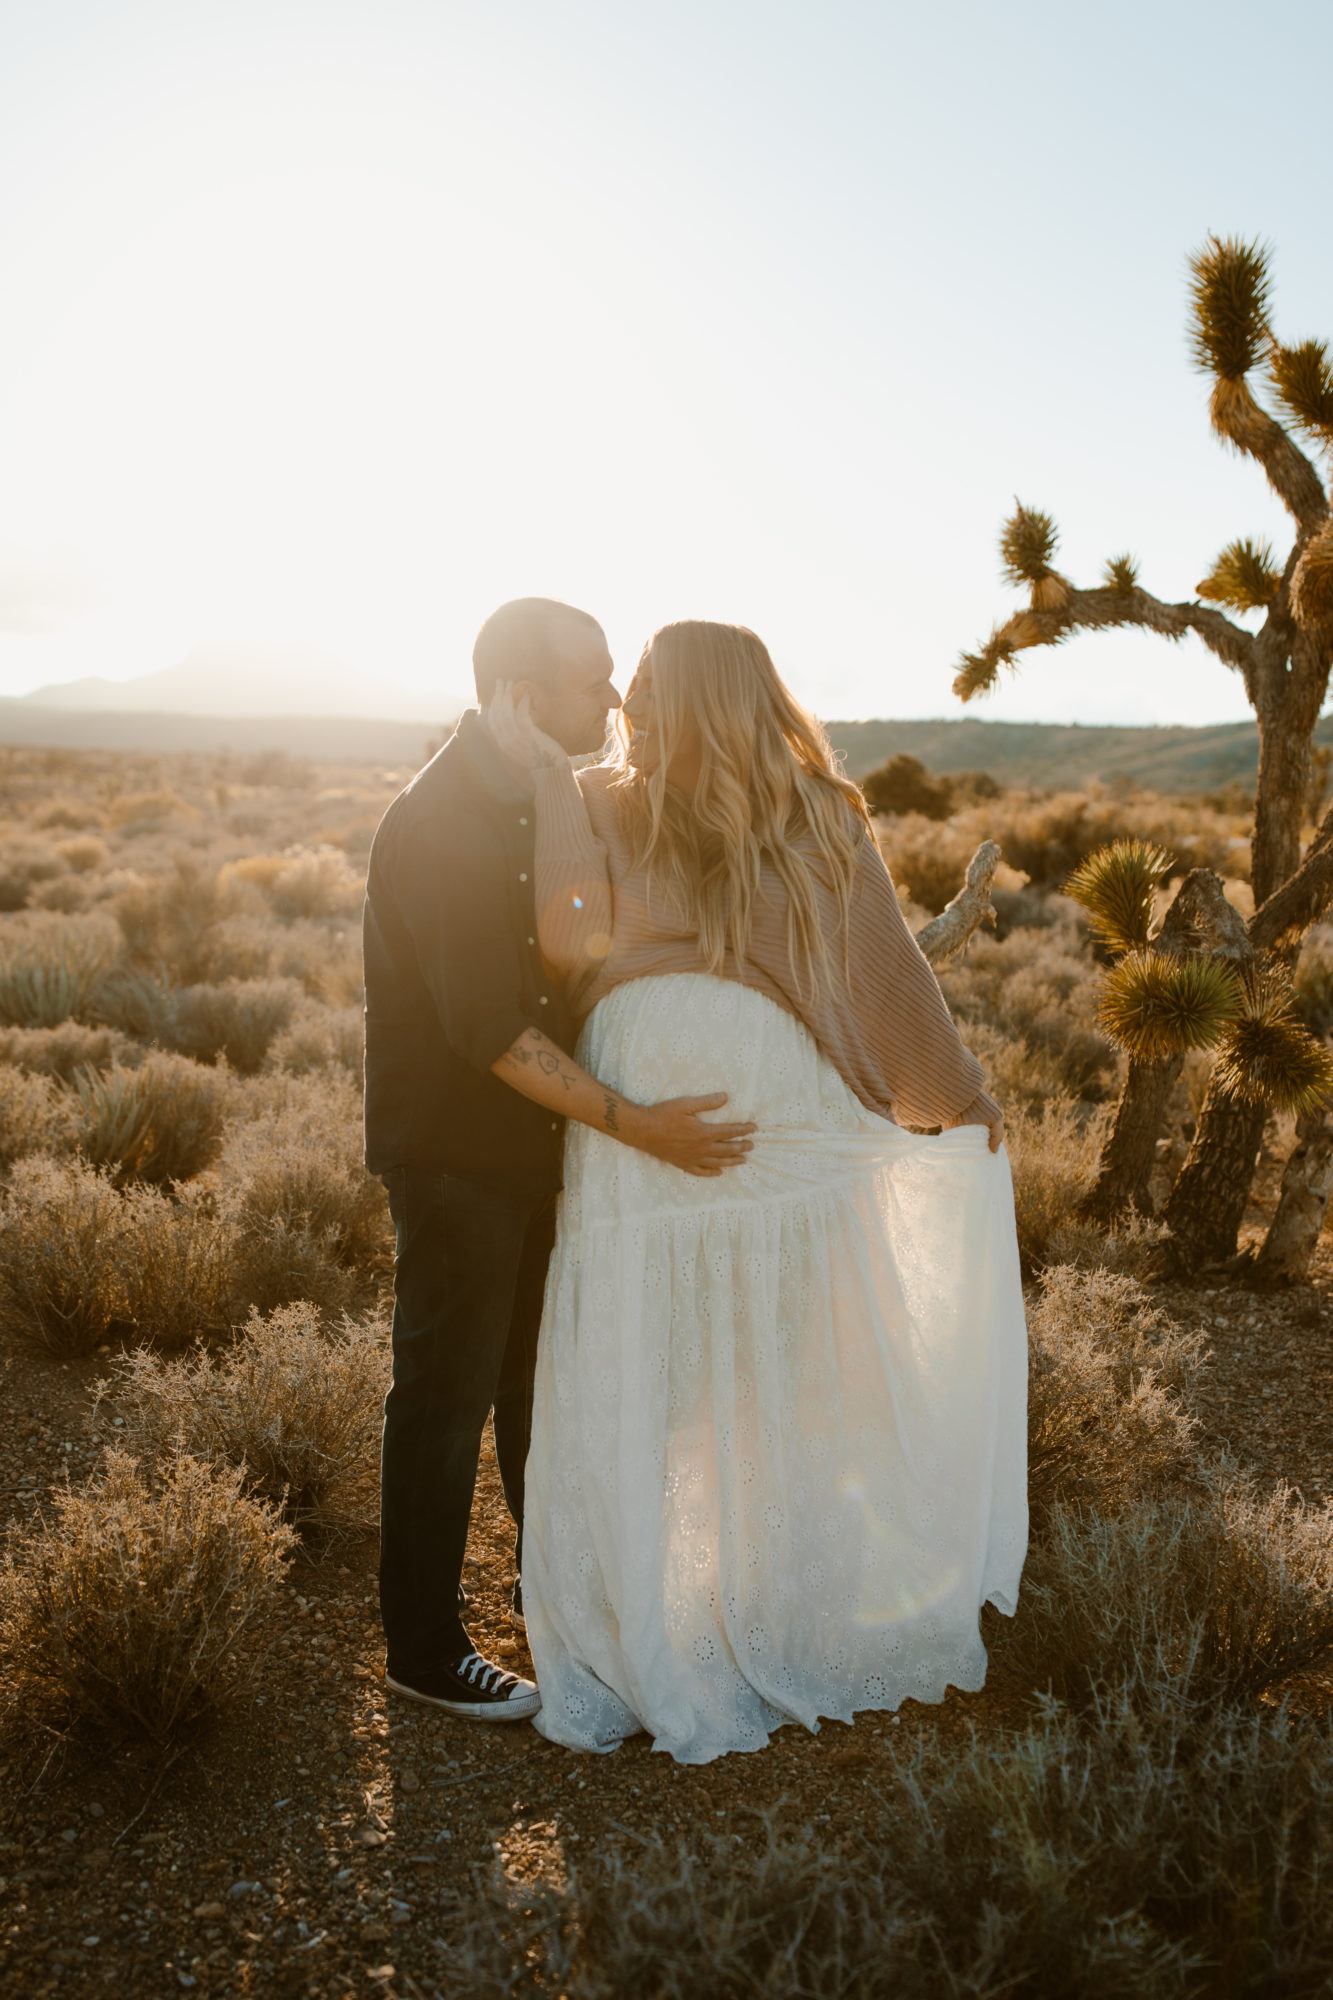 Couple during desert photo session